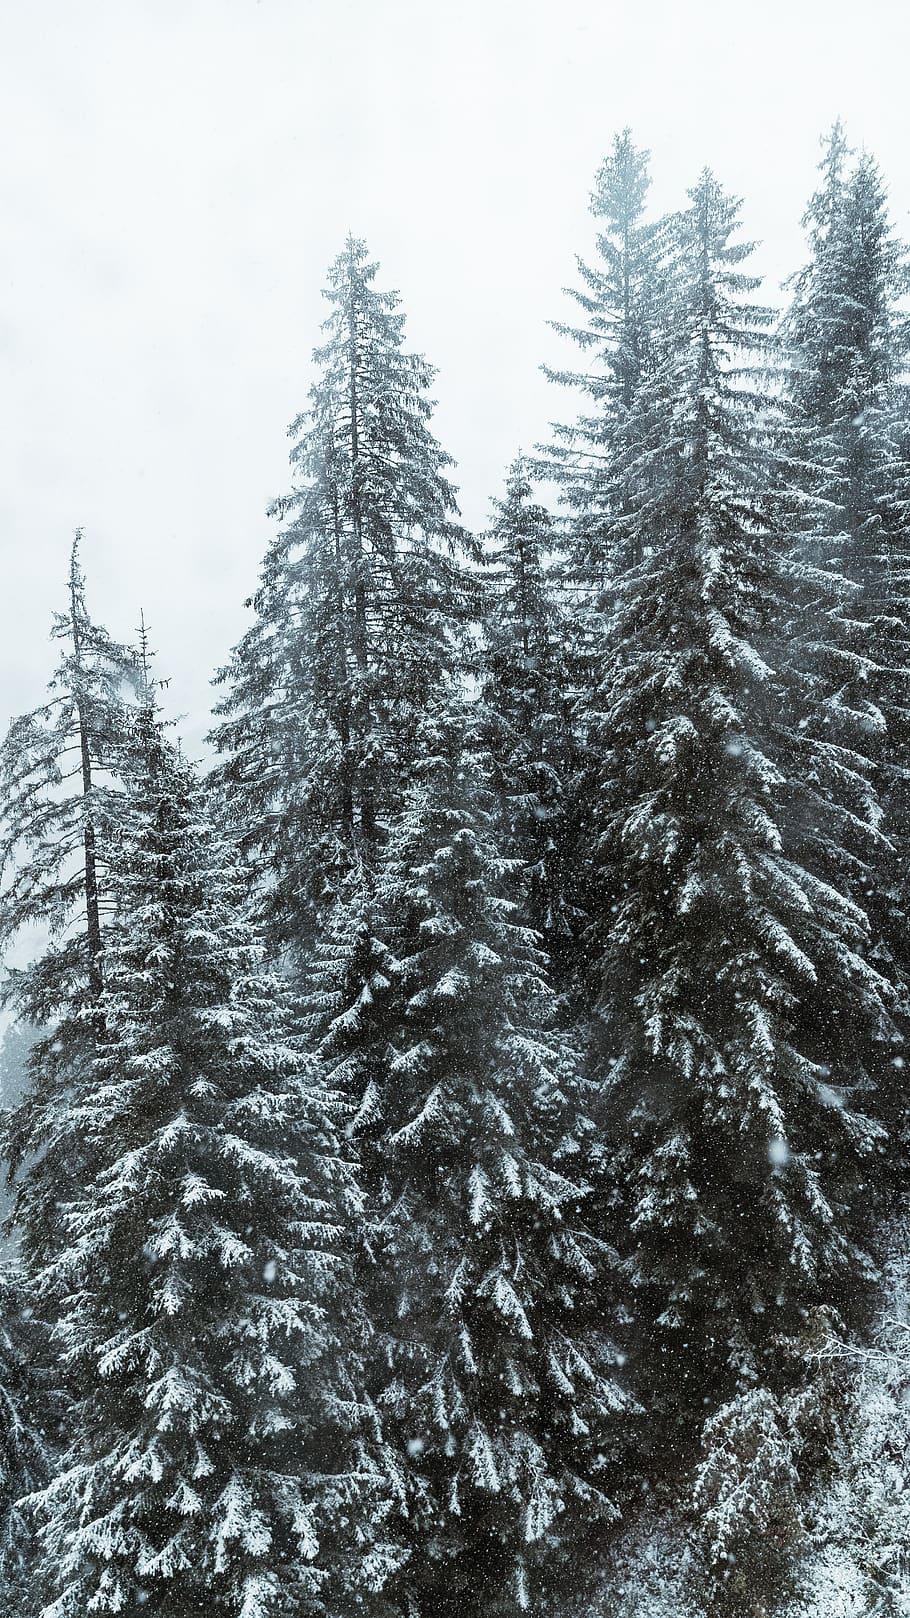 pinetrees covered with snow, plant, fir, flora, abies, conifer